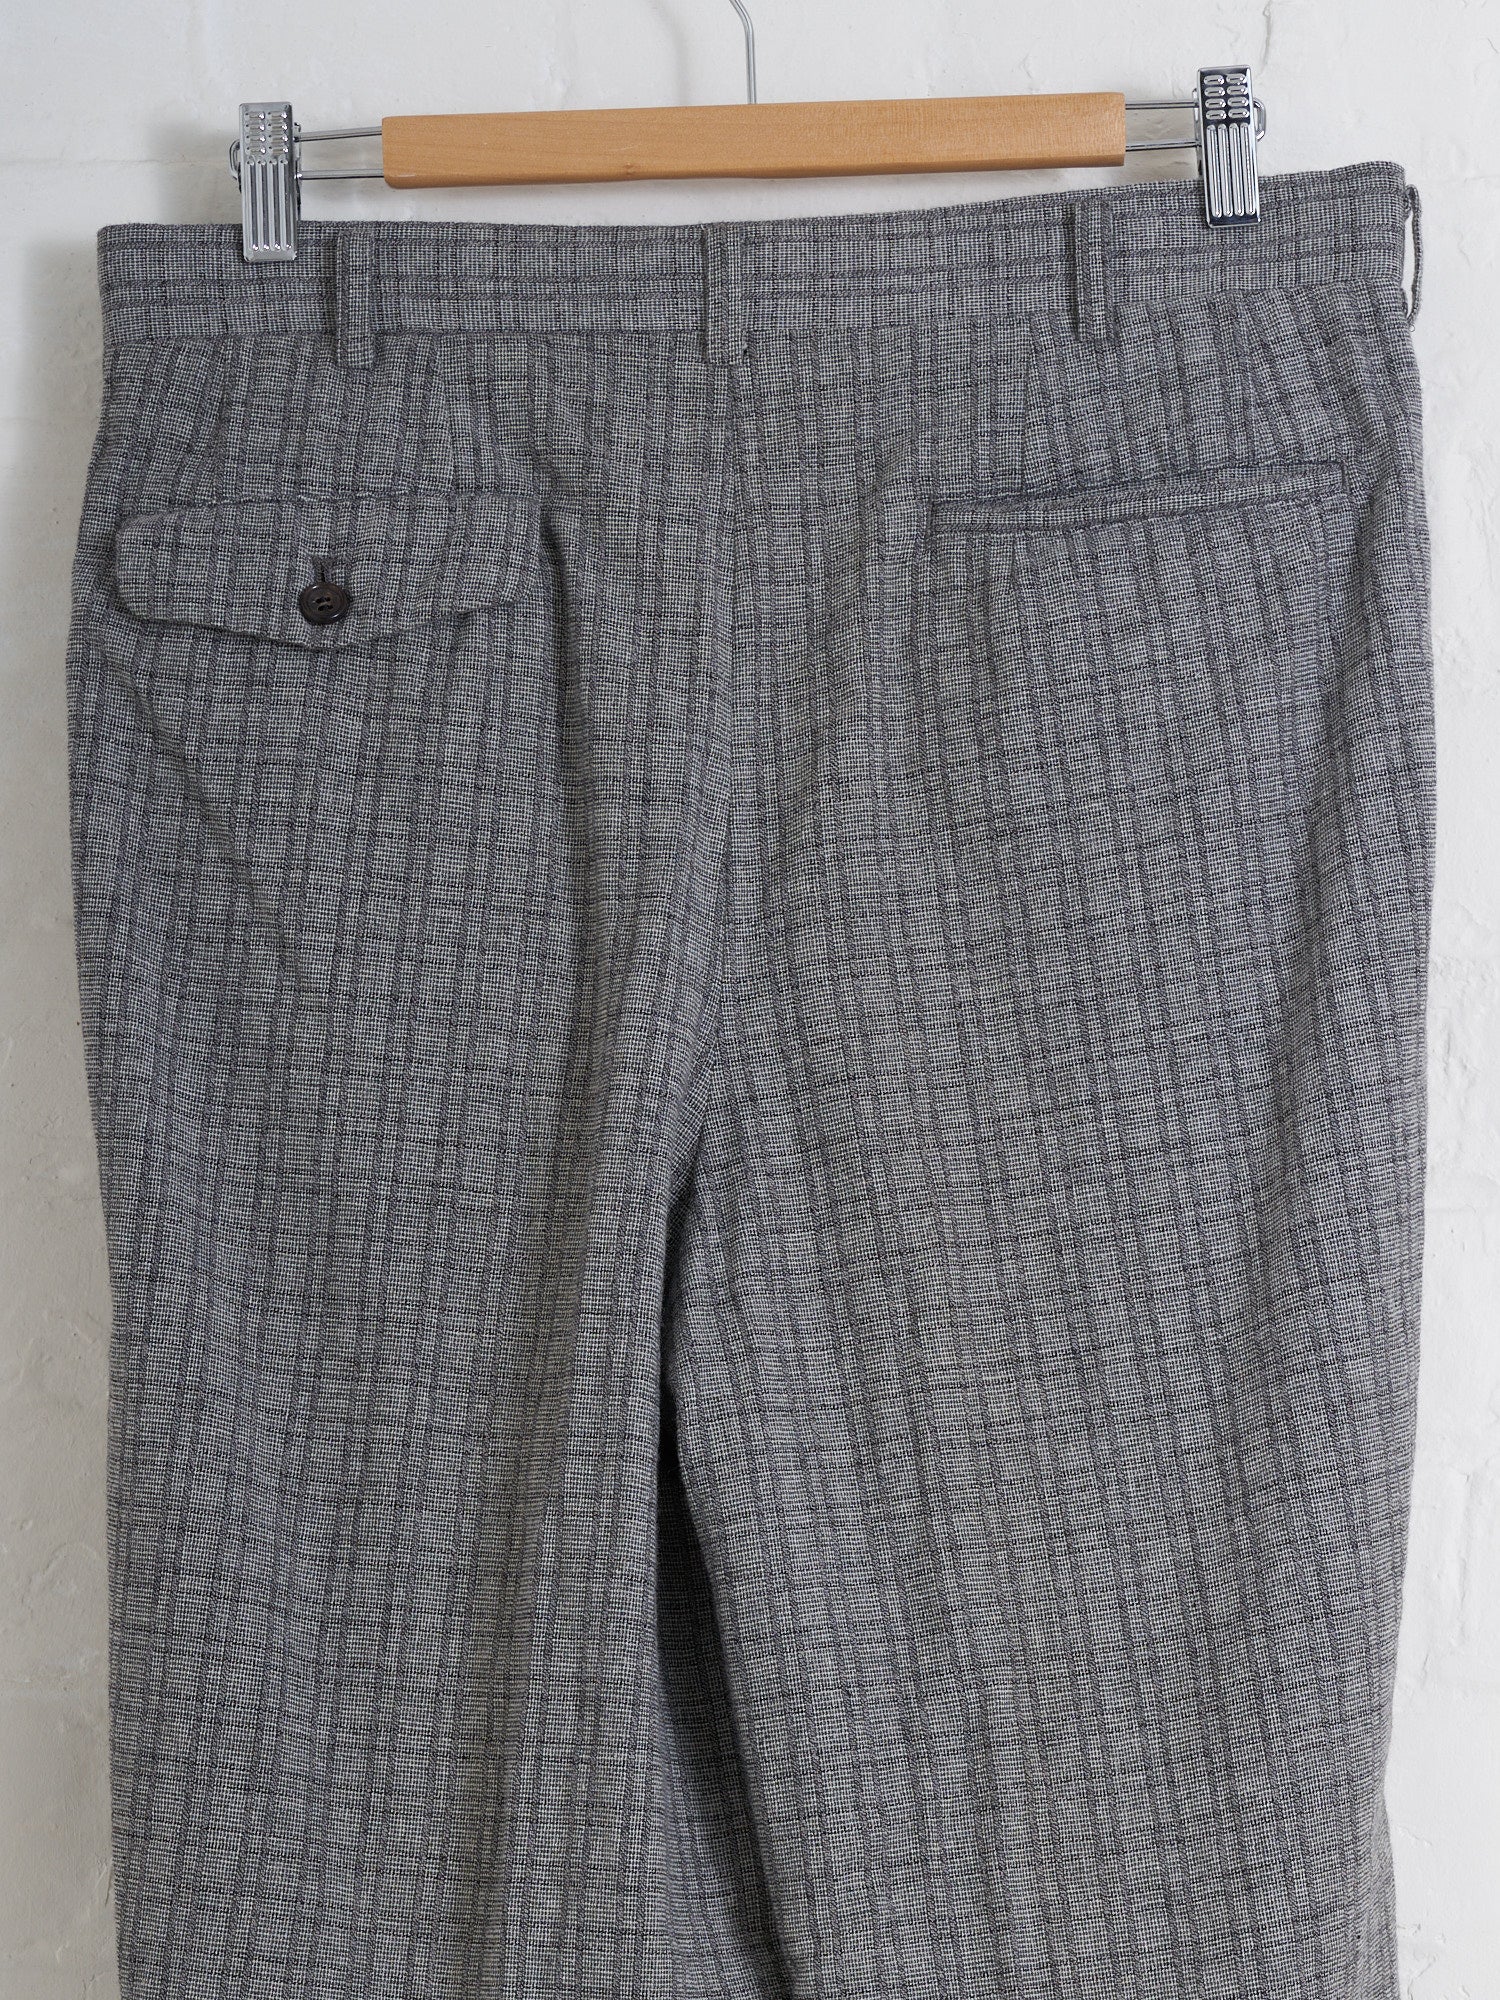 Comme des Garcons Homme 1995 grey wool check pleated trousers - M